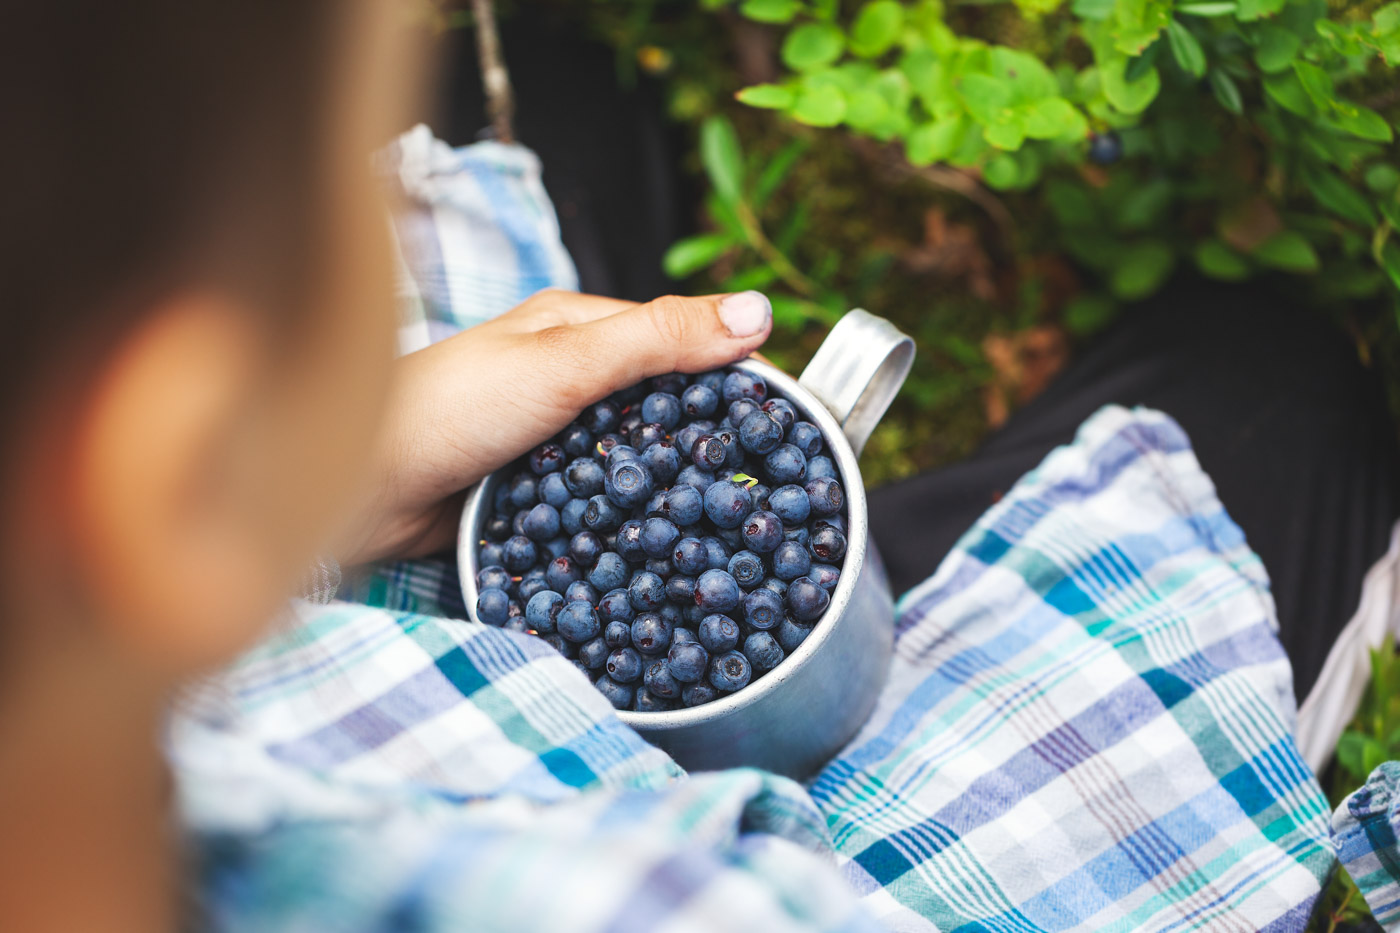 A small boy holding a metal mug full of blueberries.